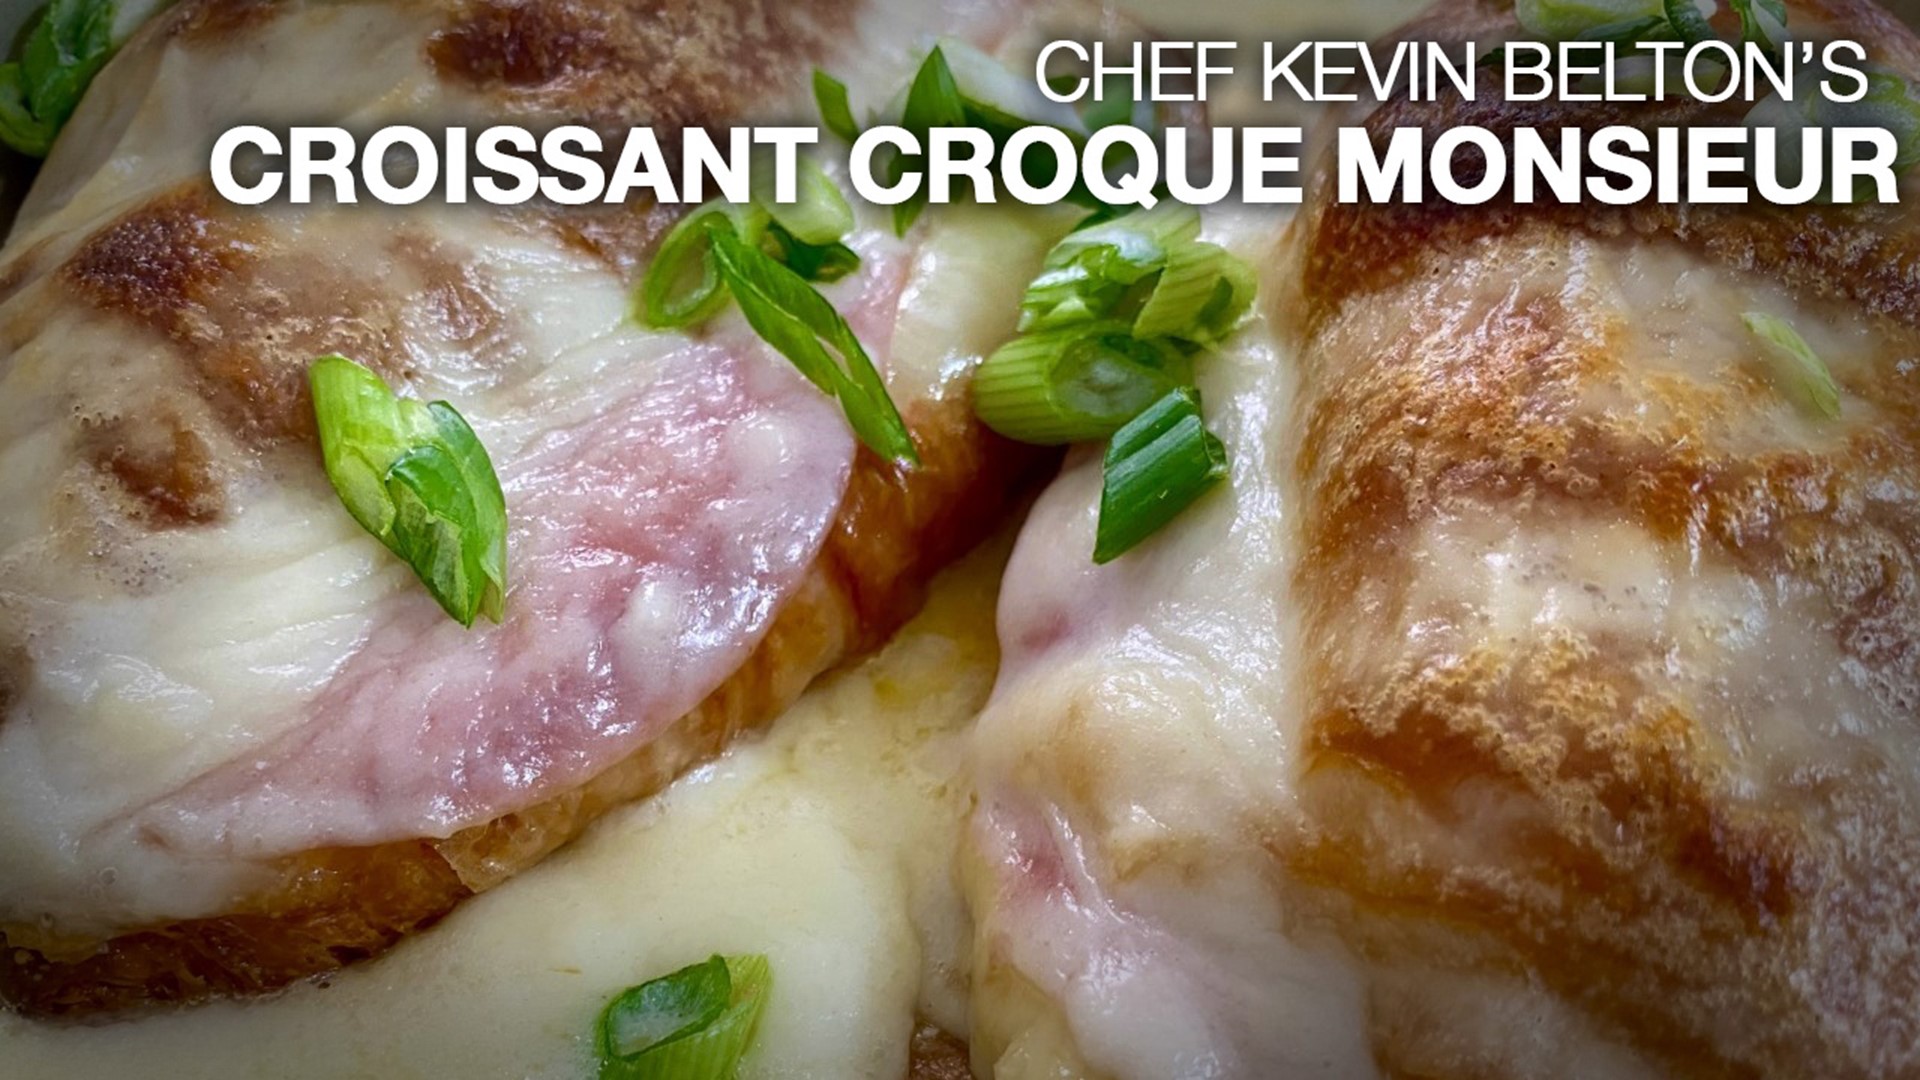 Today, we're taking the decadent croque monsieur and making it simple for at-home cooking!